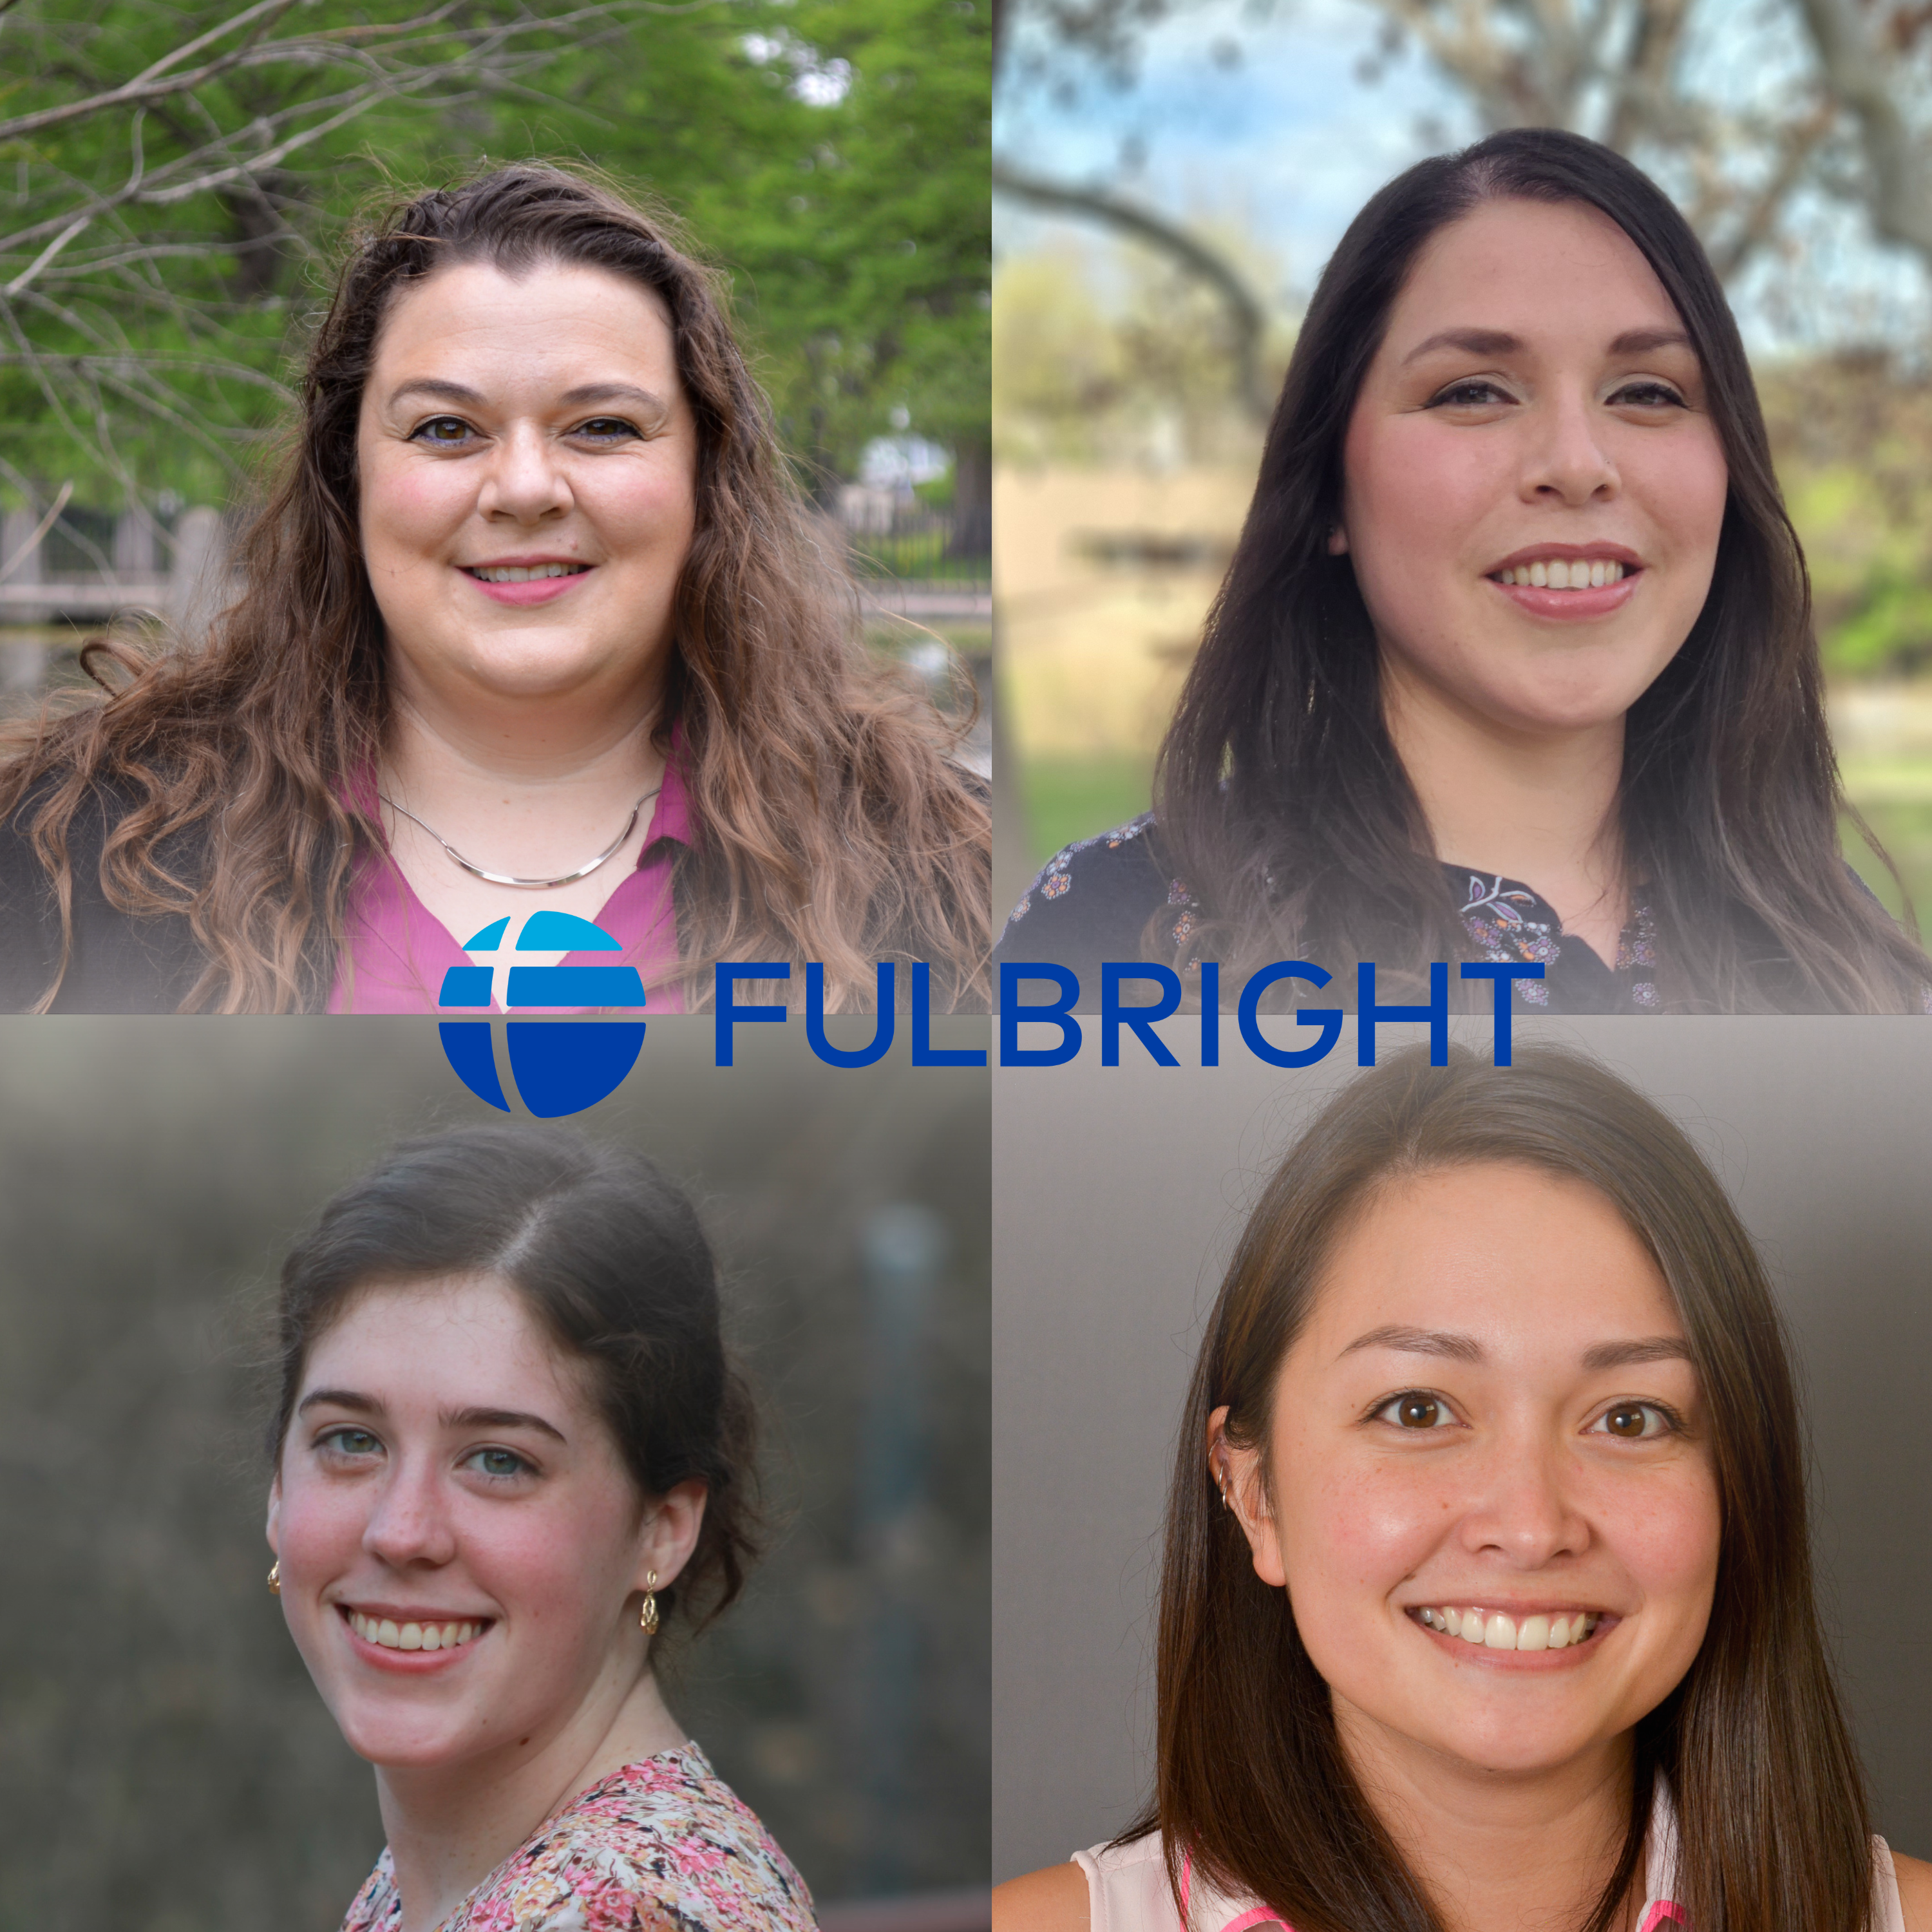 4 headshots of the Fulbright awardees in a square collage